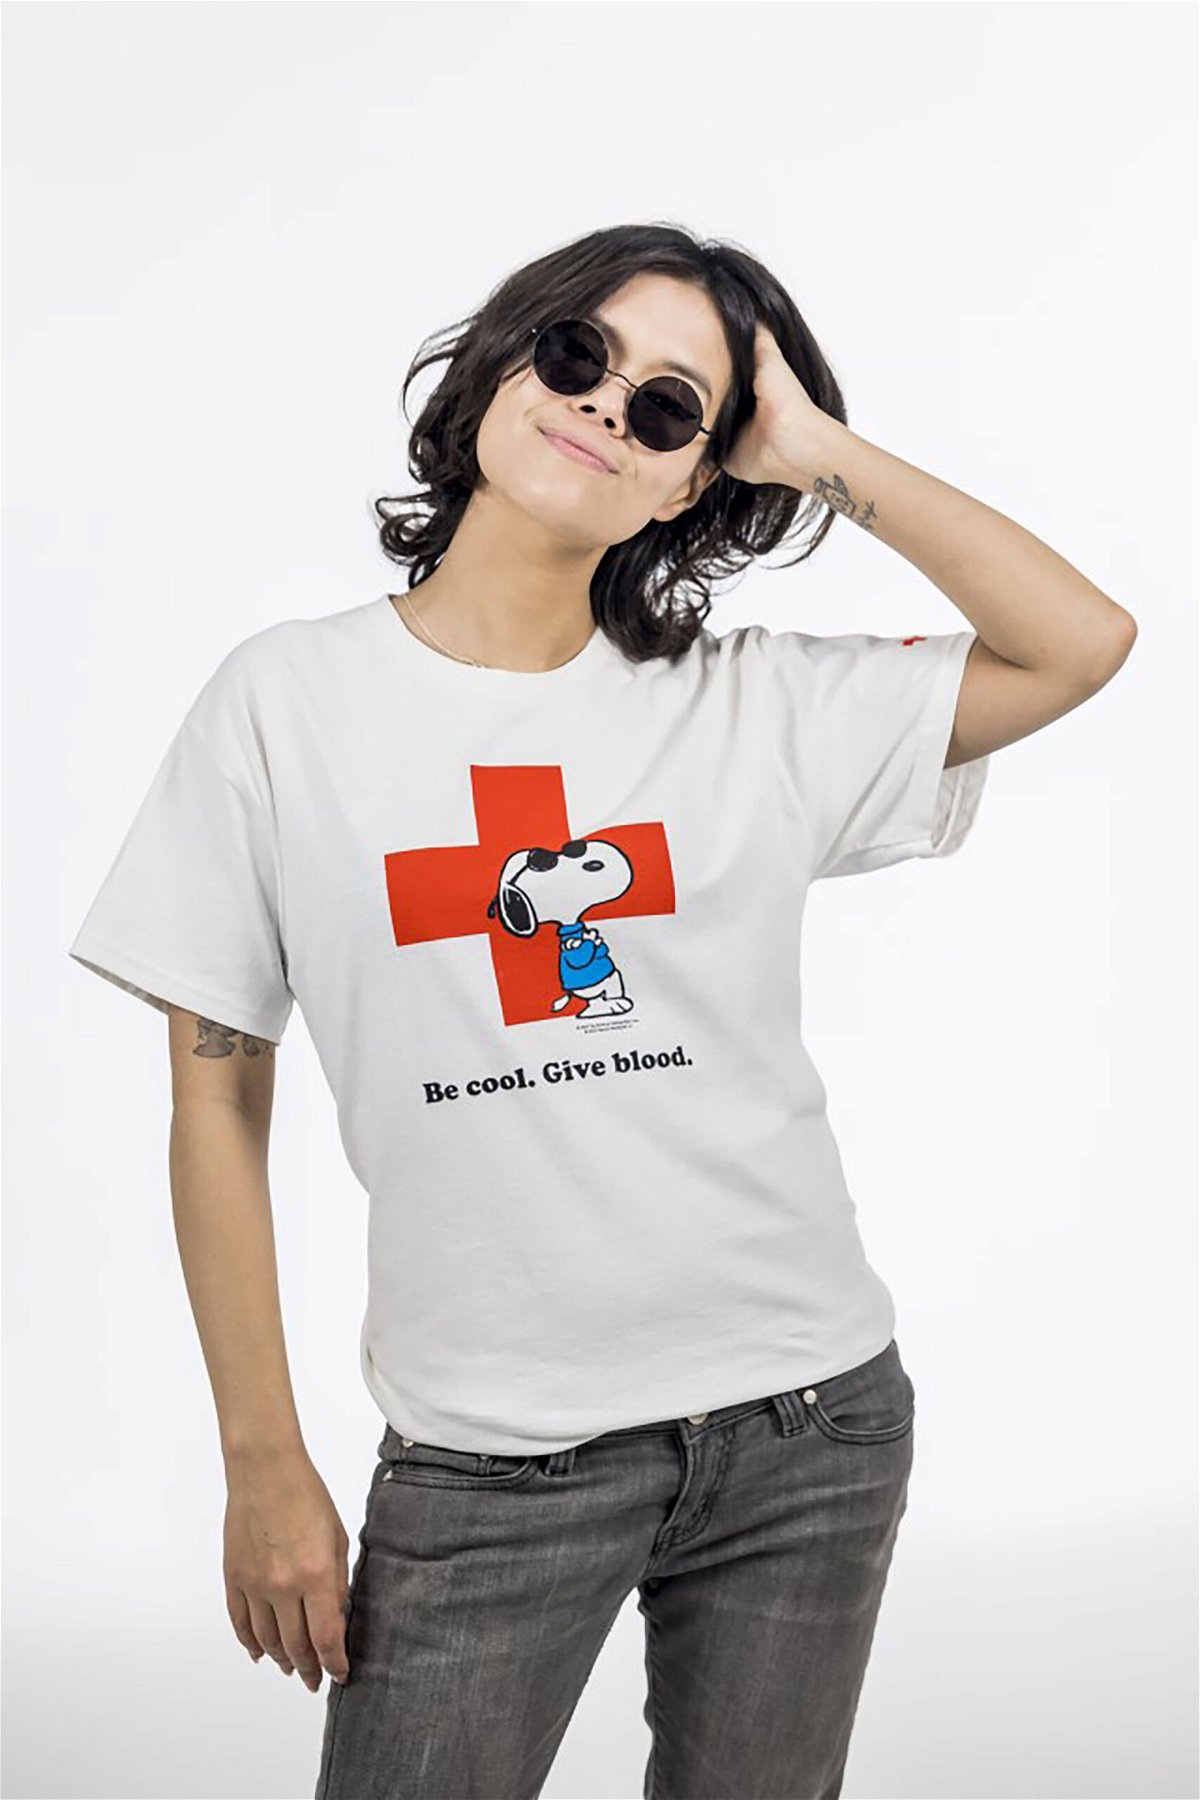 <i>Courtesy Red Cross</i><br/>This Red Cross Snoopy shirt has gone viral in recent days